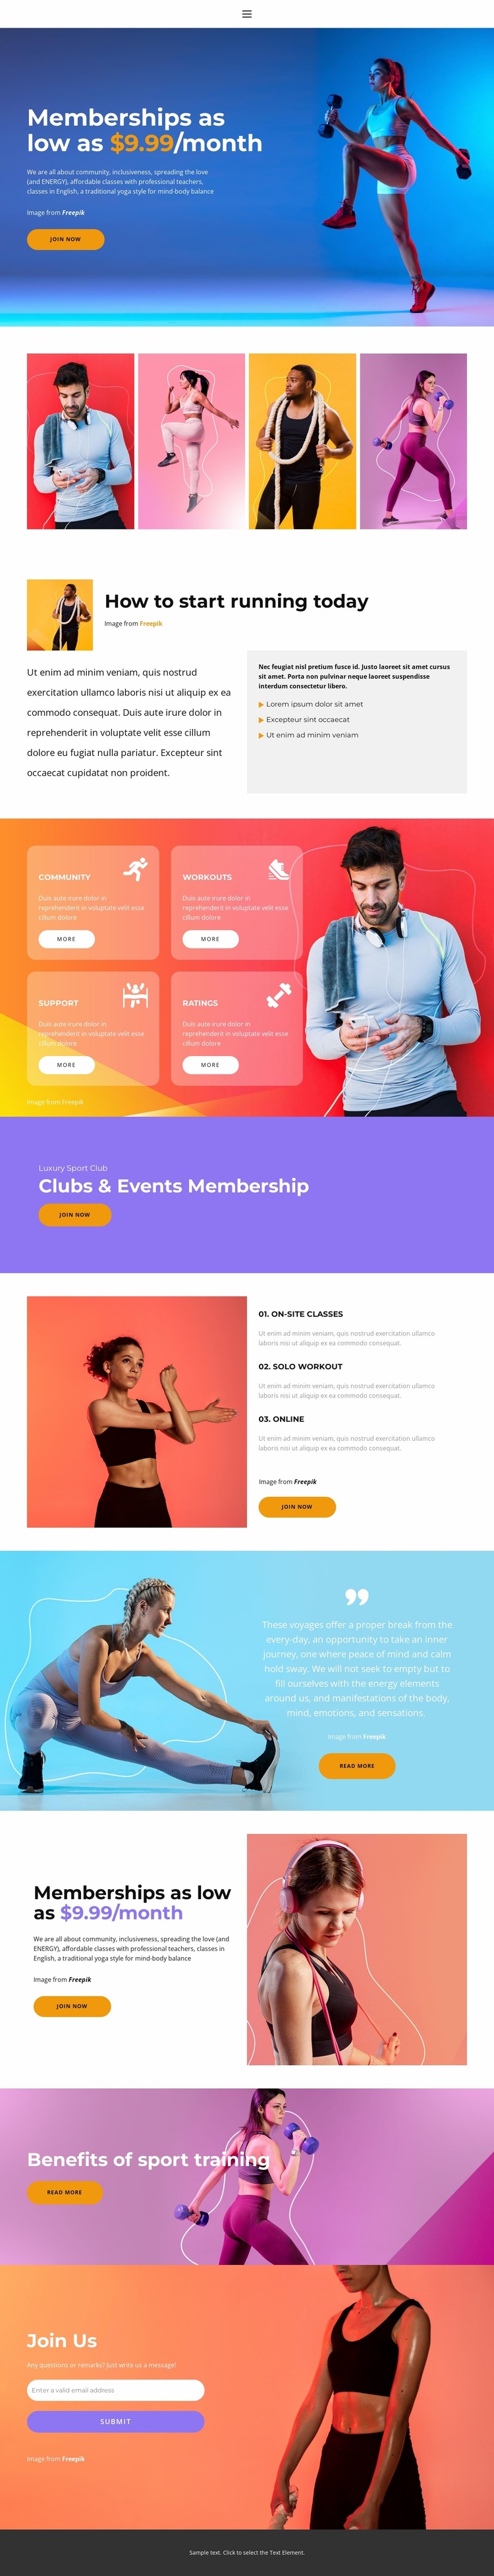 Sports every day eCommerce Template